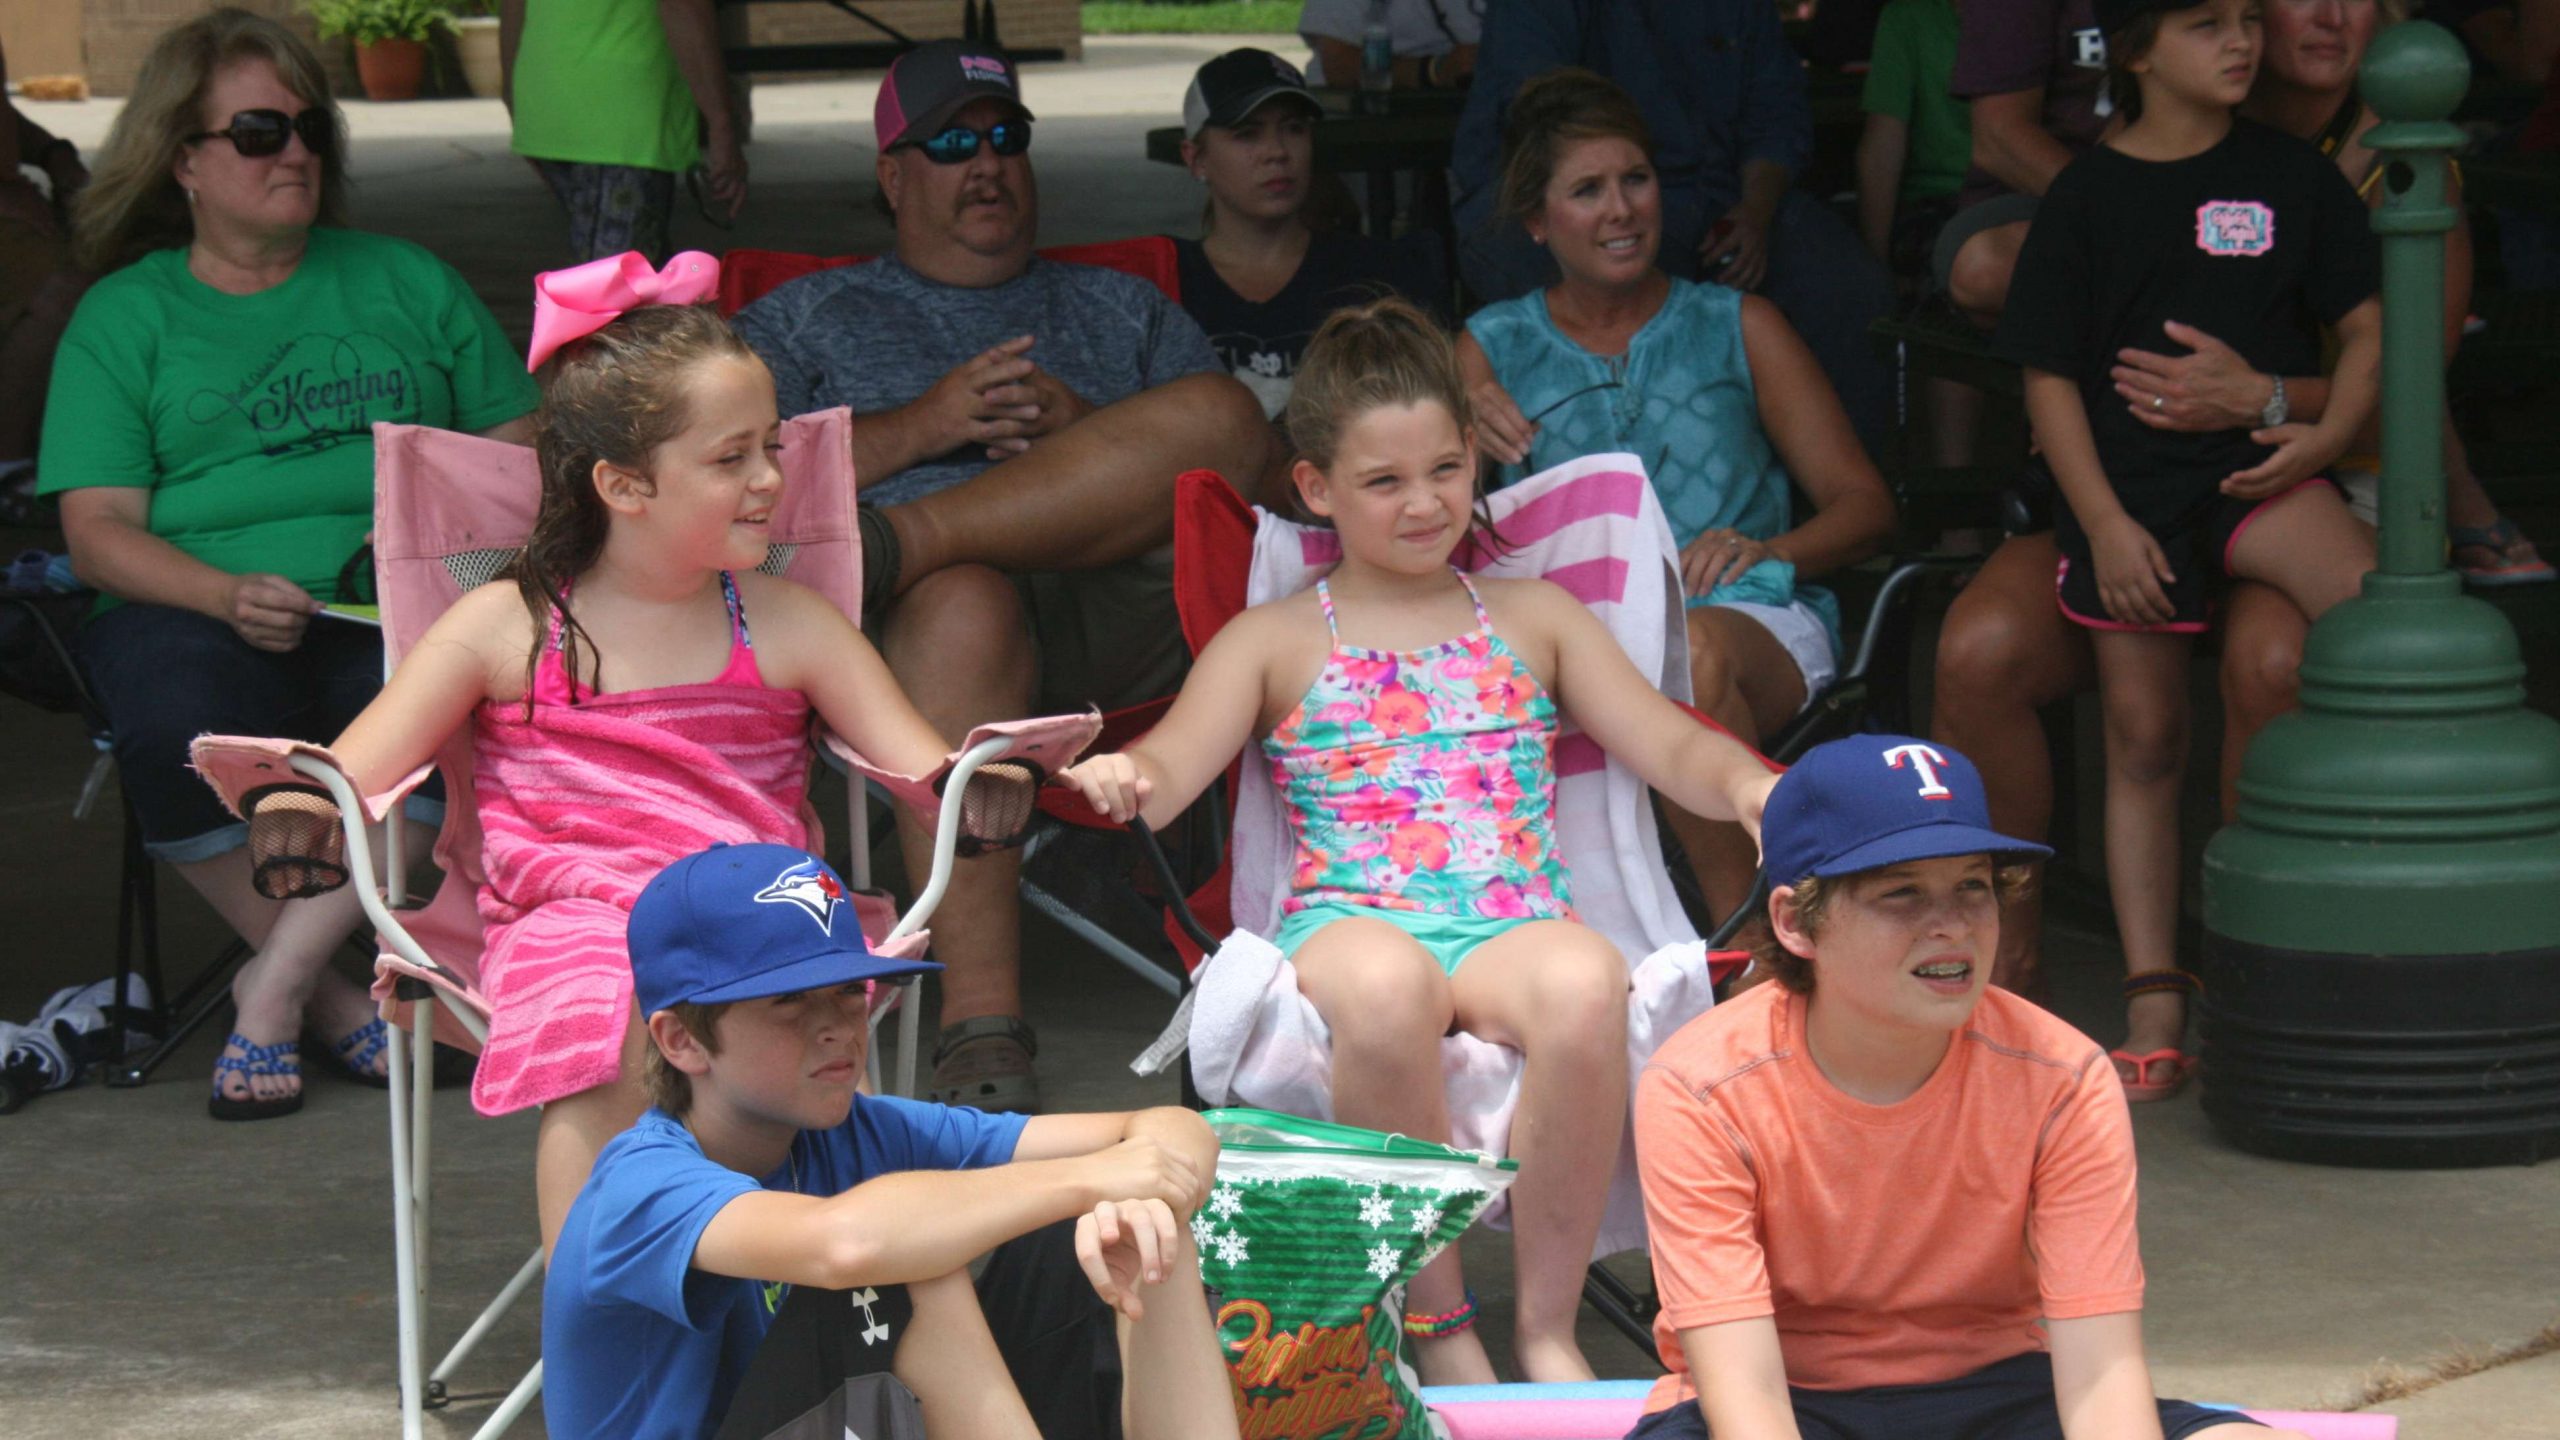 Young anglers attract young fans. Here, a group seeks shade under a pavilion at Cypress Bend Park before the action begins on stage.